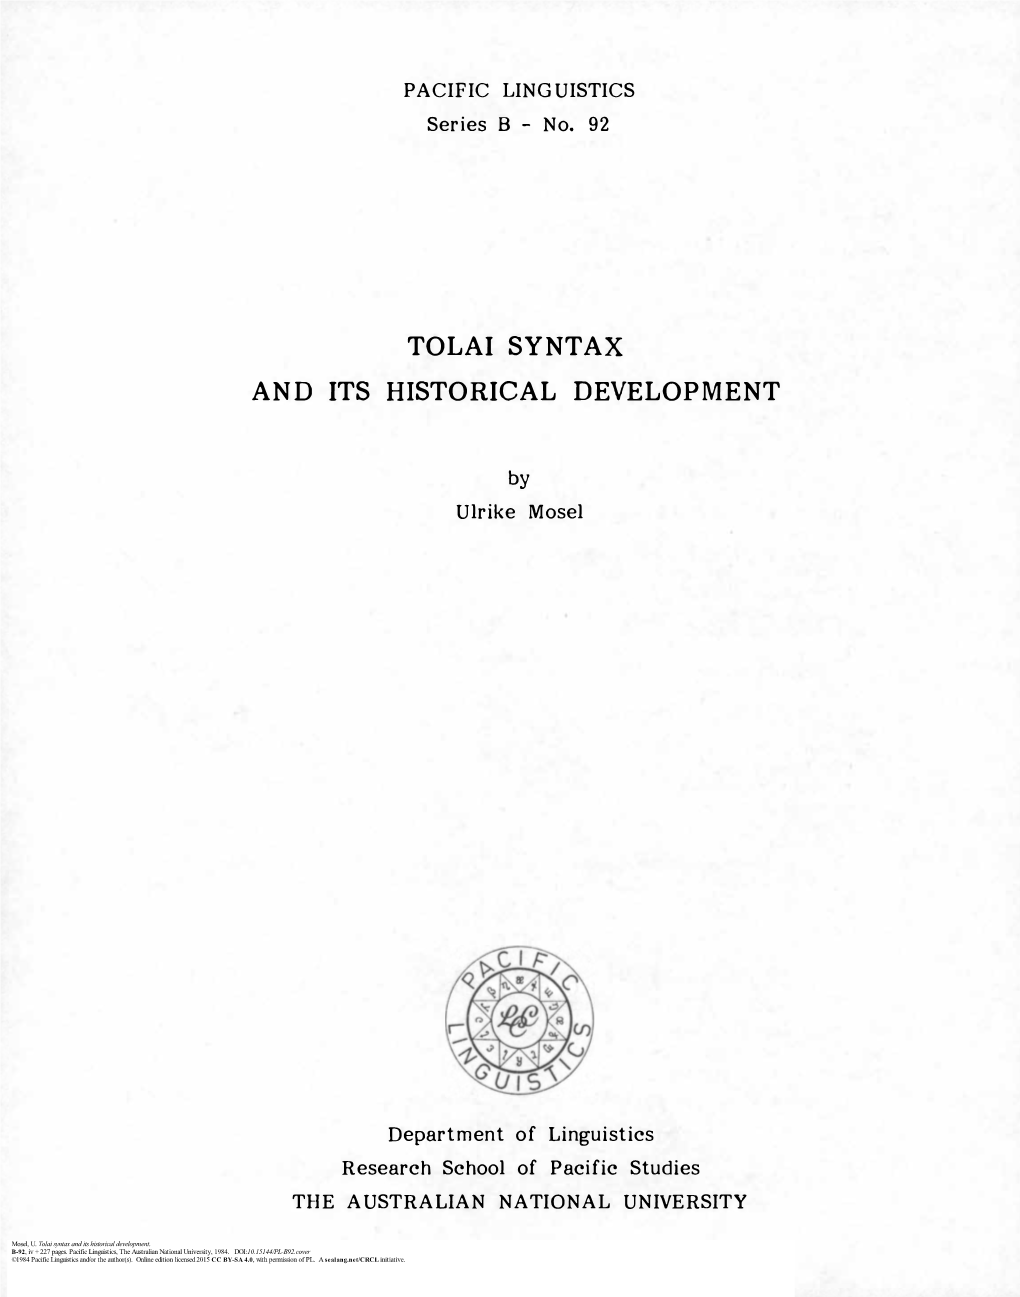 Tolai Syntax and Its Historical Development